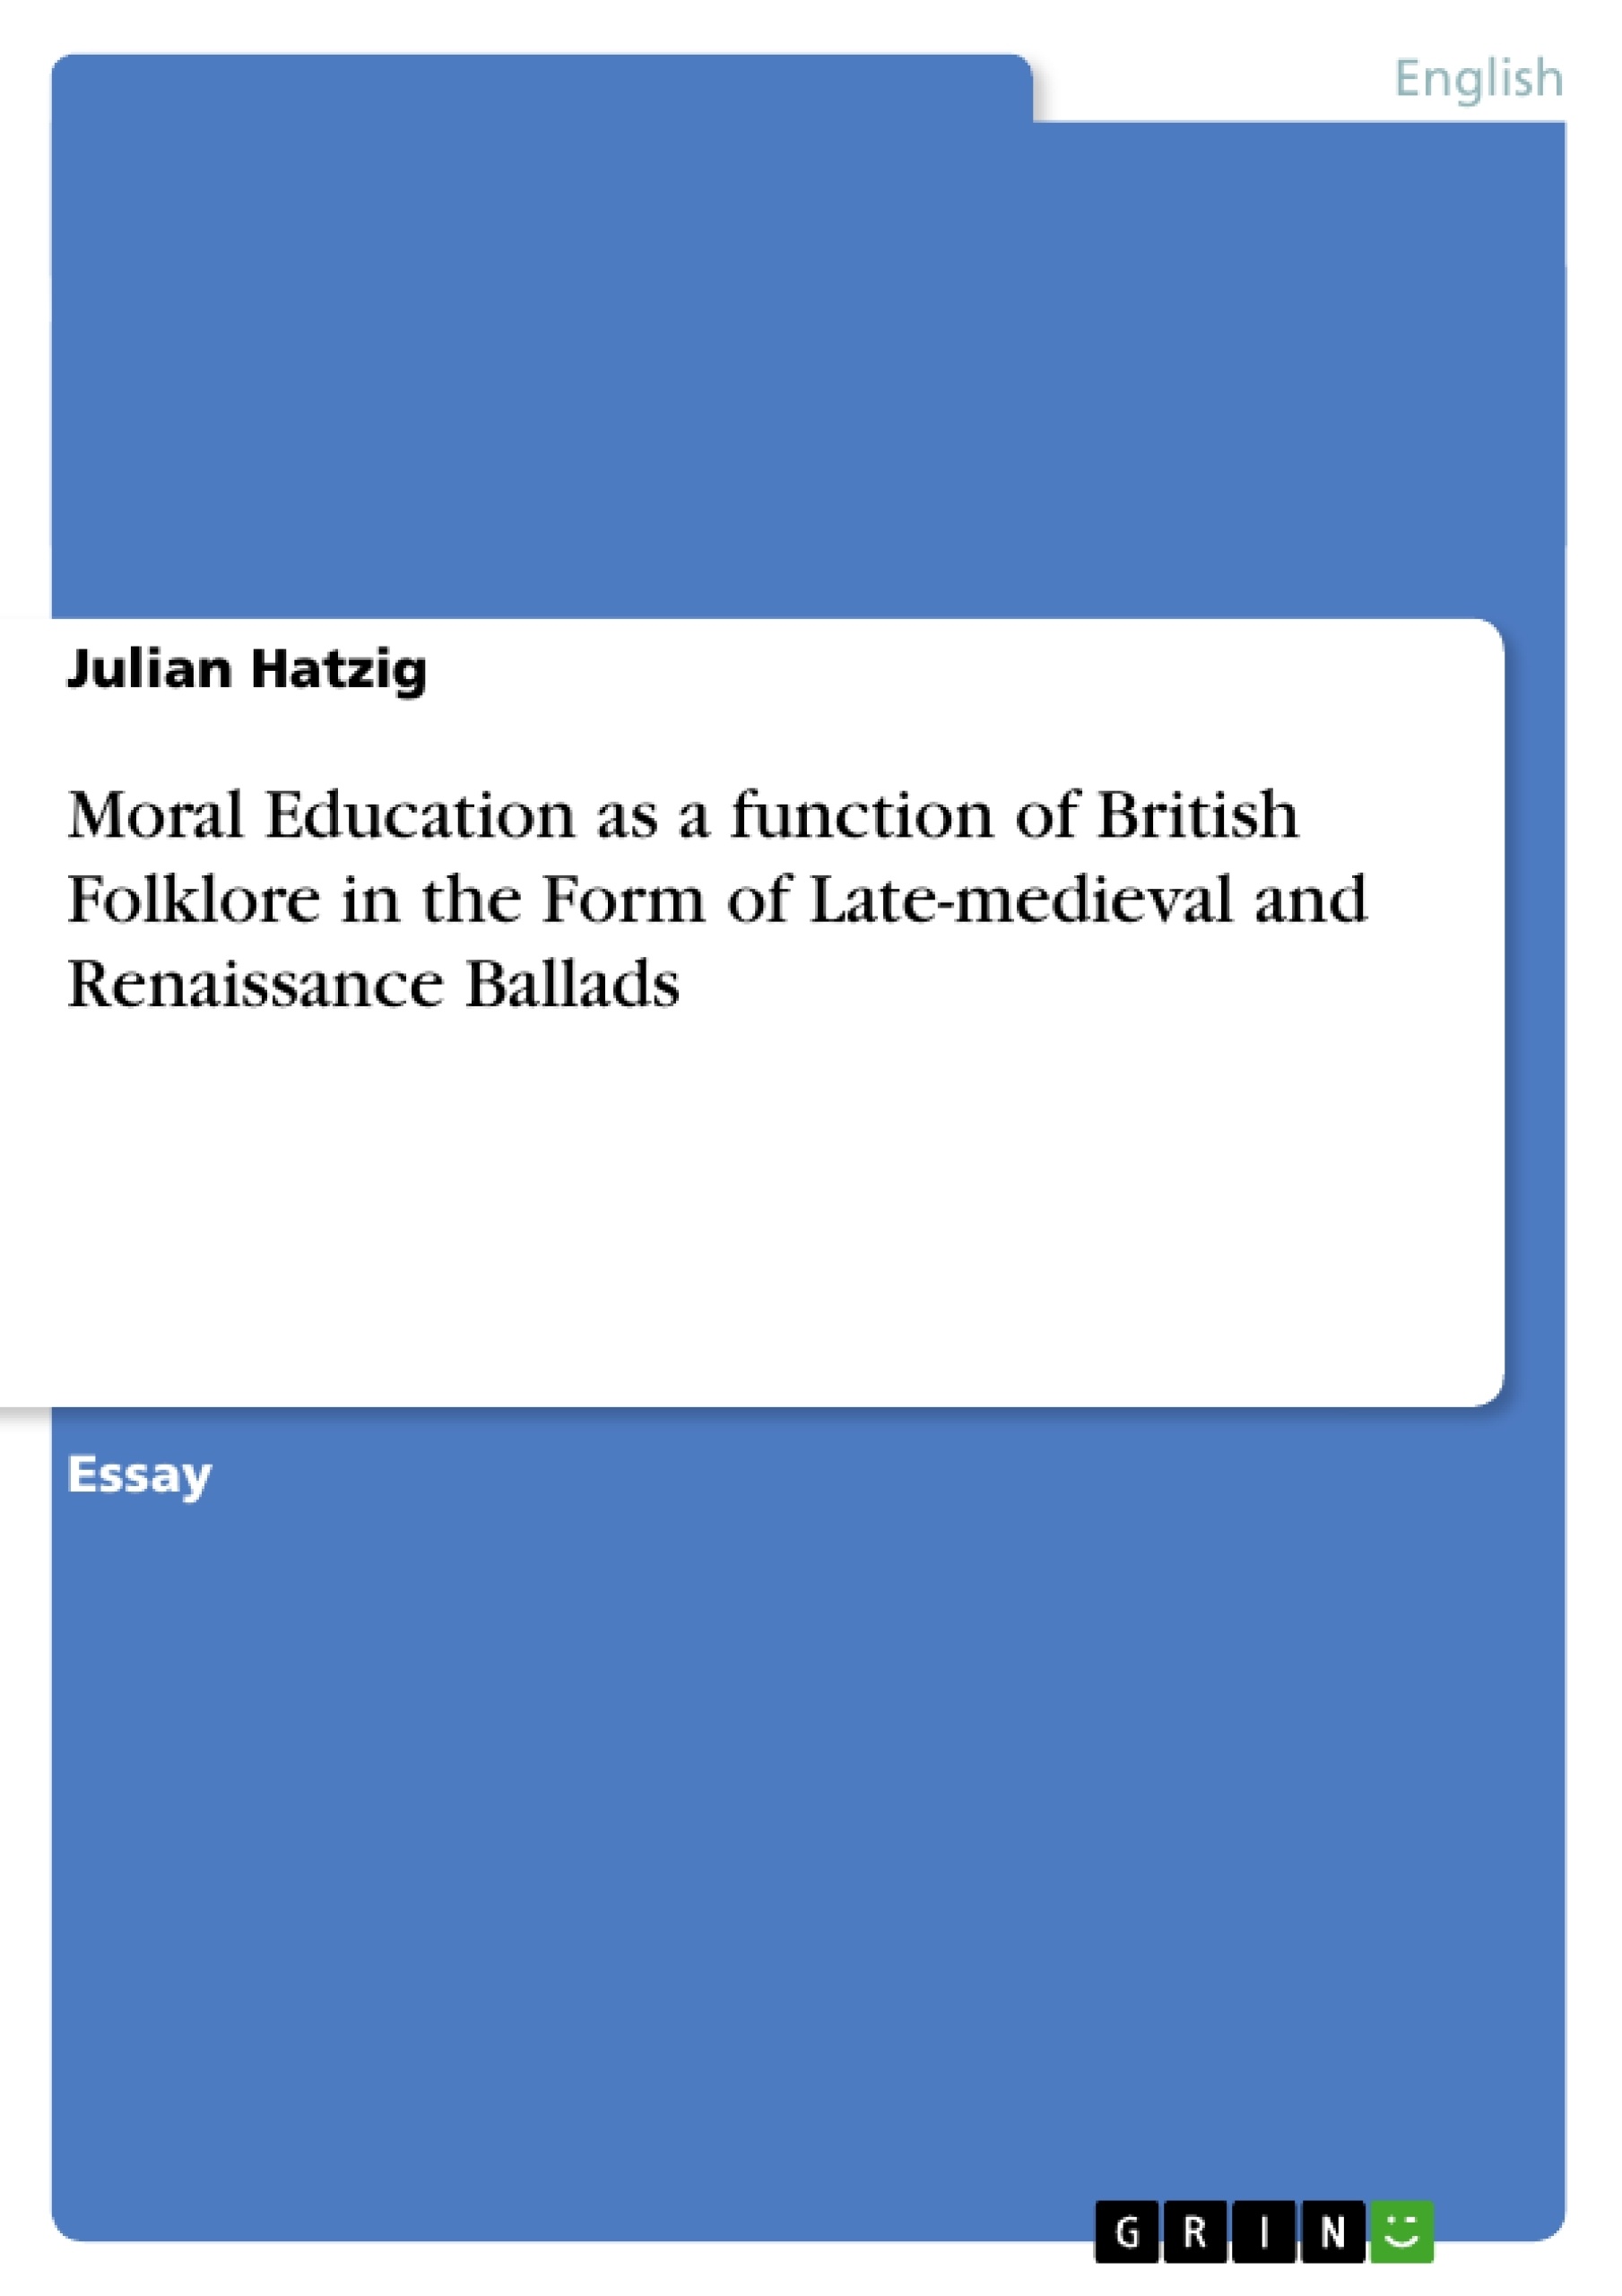 Title: Moral Education as a function of British Folklore in the Form of Late-medieval and Renaissance Ballads